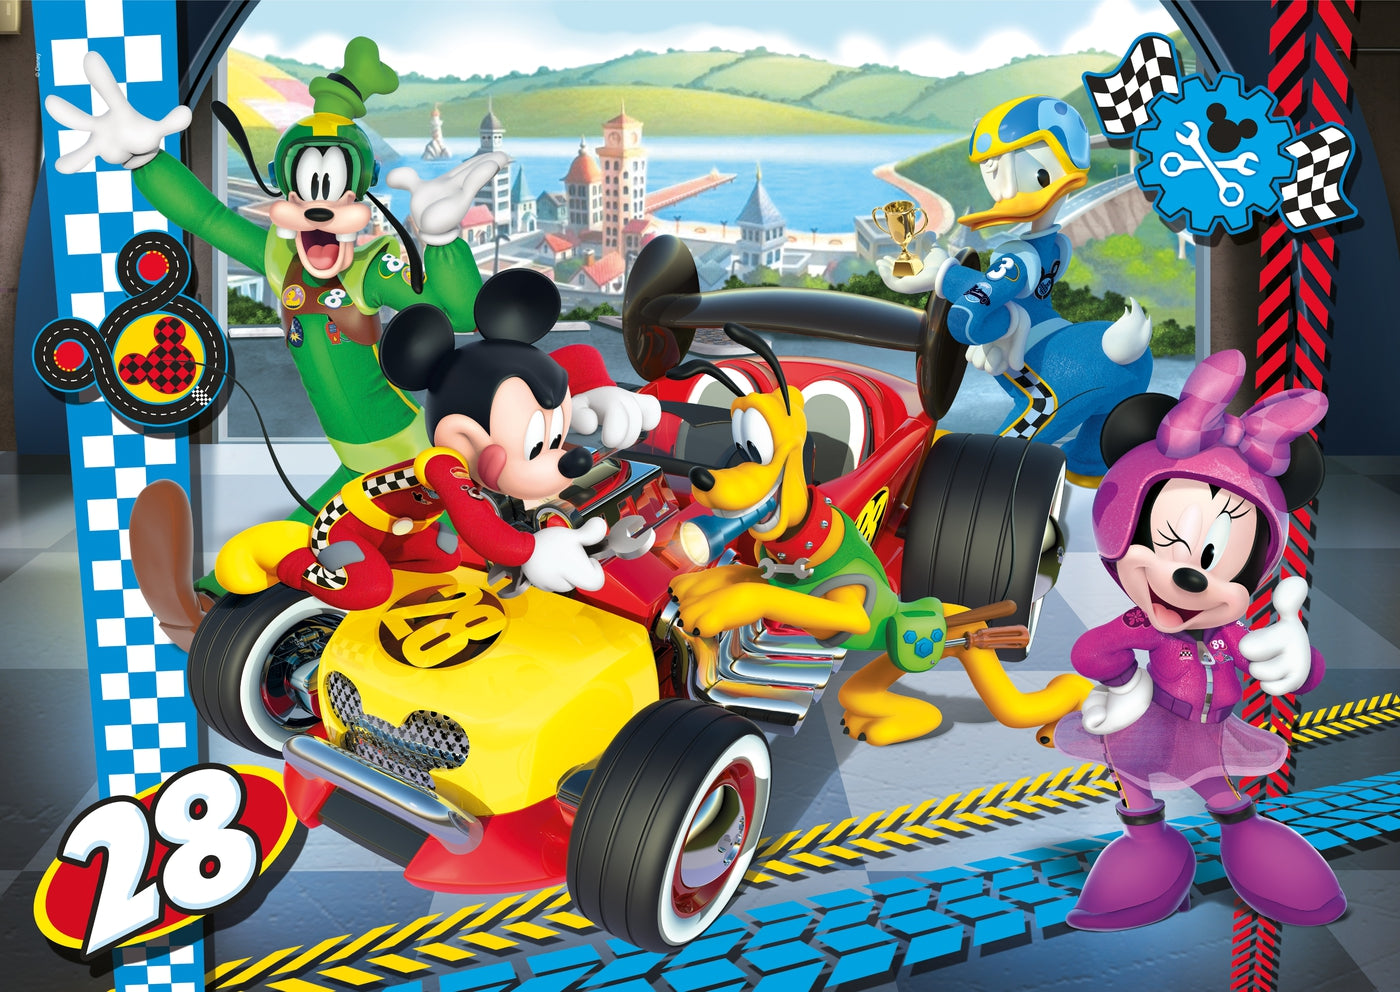 Clementoni - Pzl 24 Maxi Mickey & The Roadster Racers